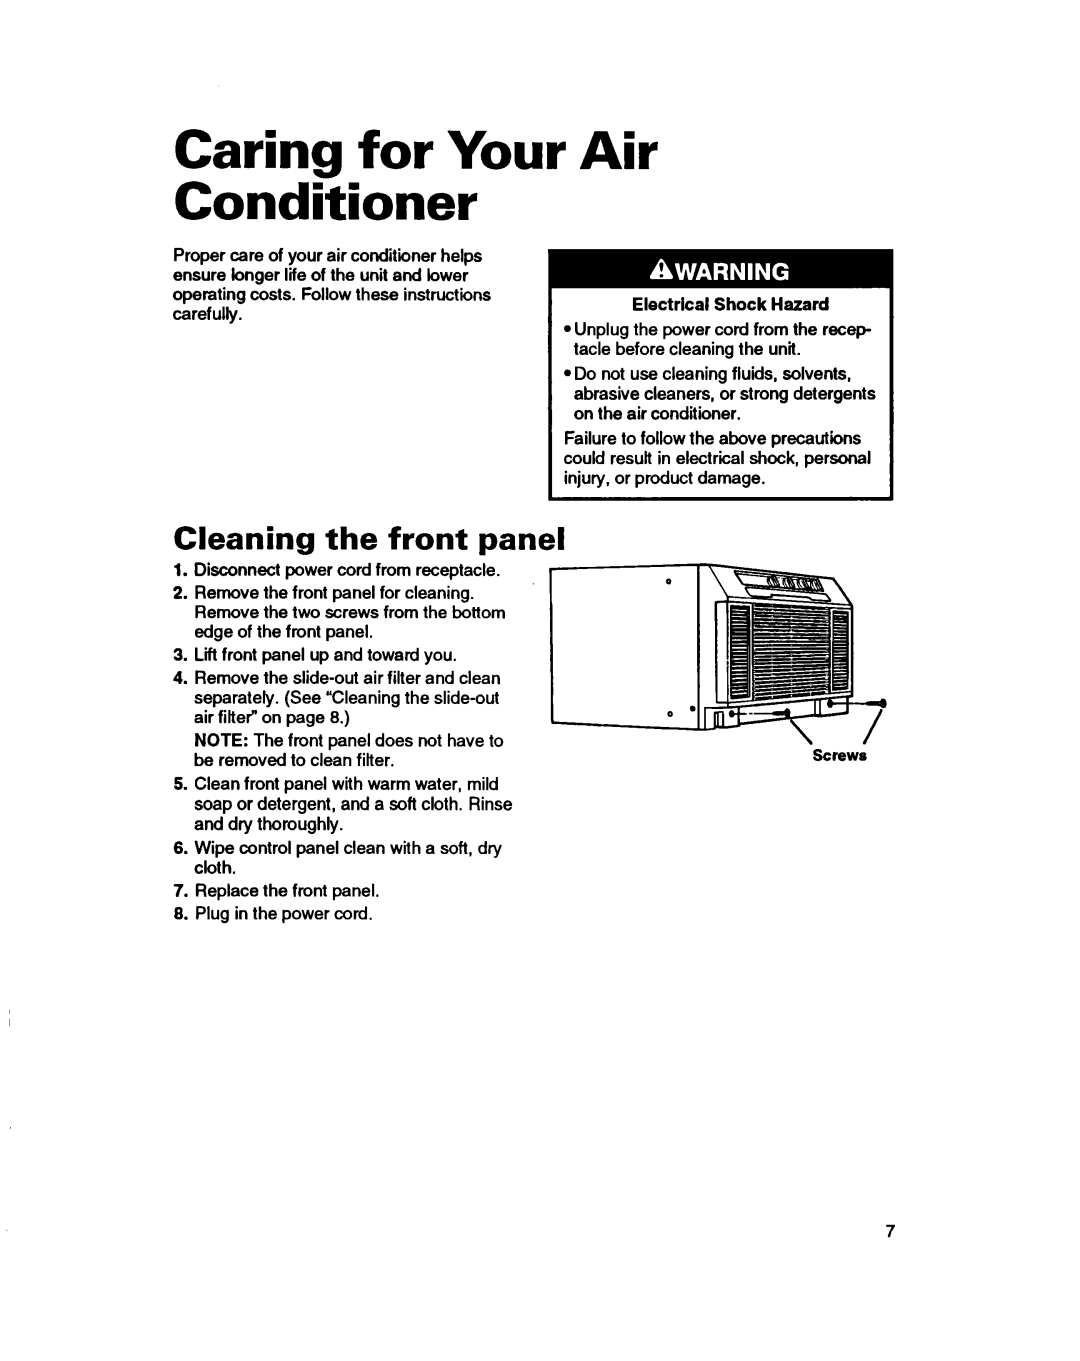 Whirlpool ACH082XD0 warranty Caring for Your Air Conditioner, Cleaning the front panel, Electrical Shock Hazard 